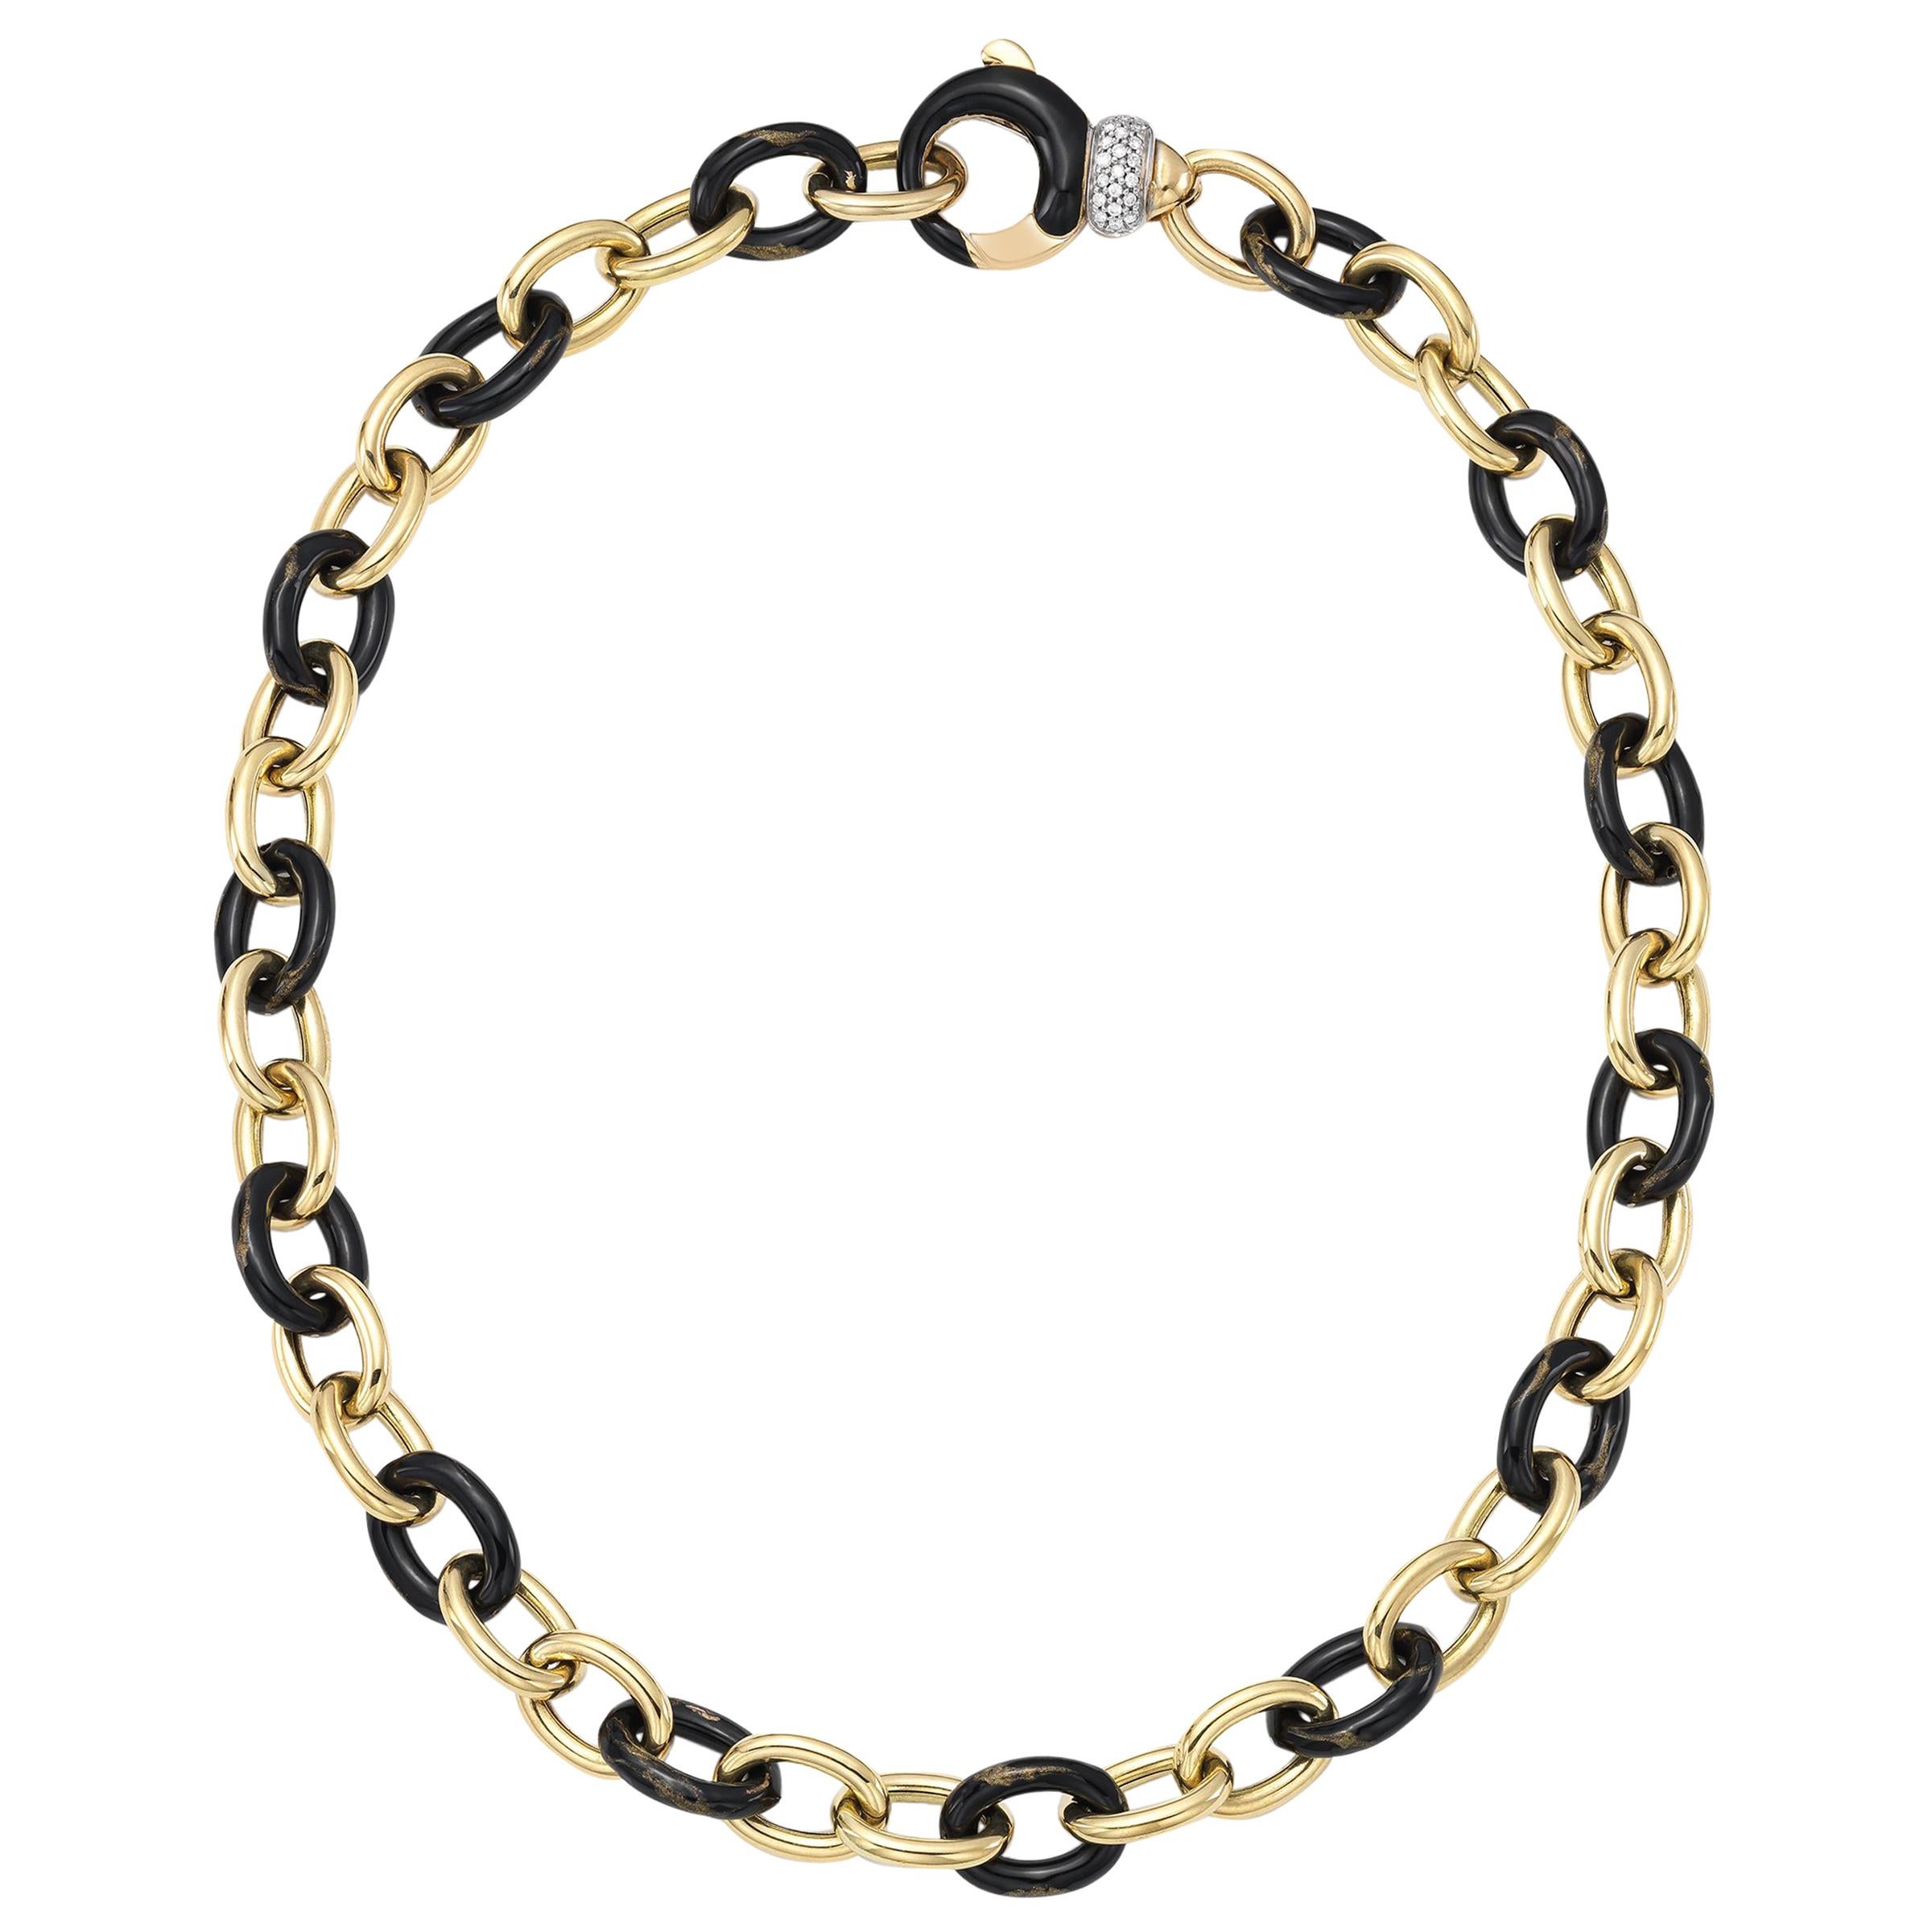 Vintage Soho Black and Yellow Foliage Link Necklace with Diamond Clasp